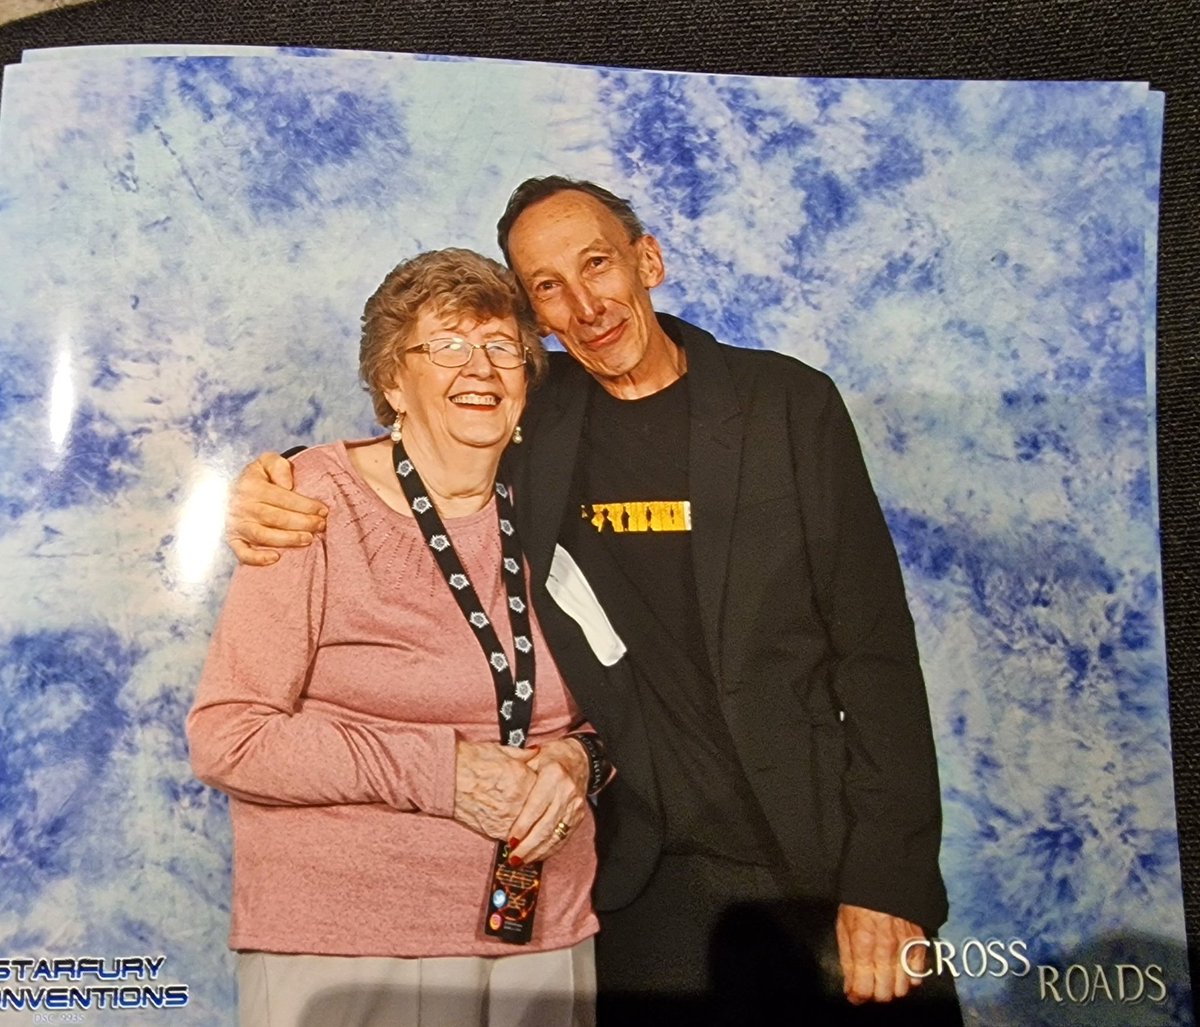 @JulianRichings @starfuryevents @ToddStashwick @MurielFPhotos Absolutely brilliant to meet you. I think my mum, Maxine was like a teenager when she met you.